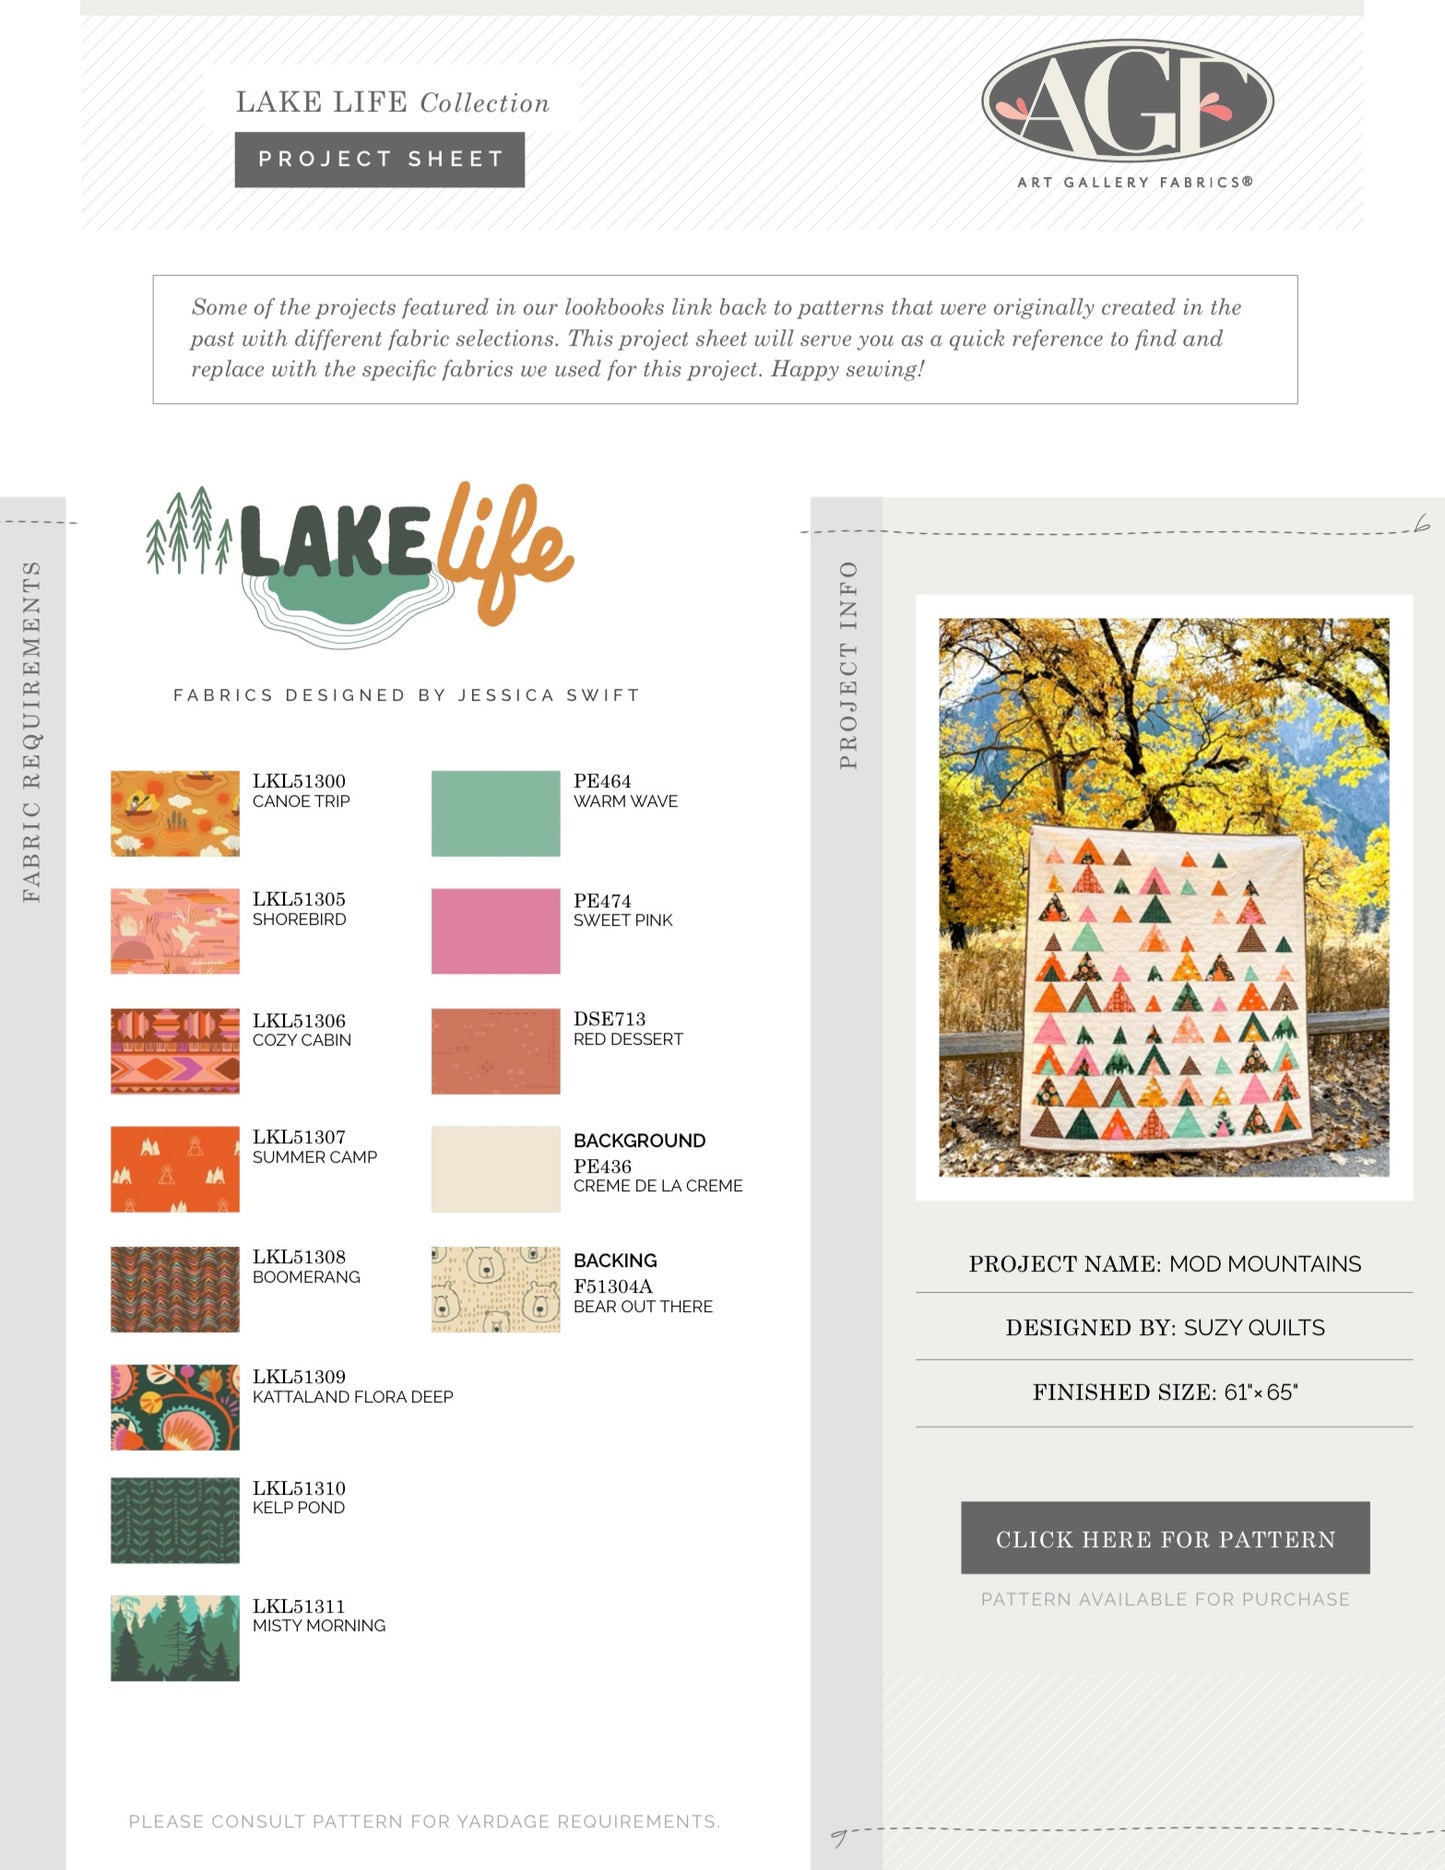 Mod Mountains Quilt Kit featuring Lakelife by Jessica Swift